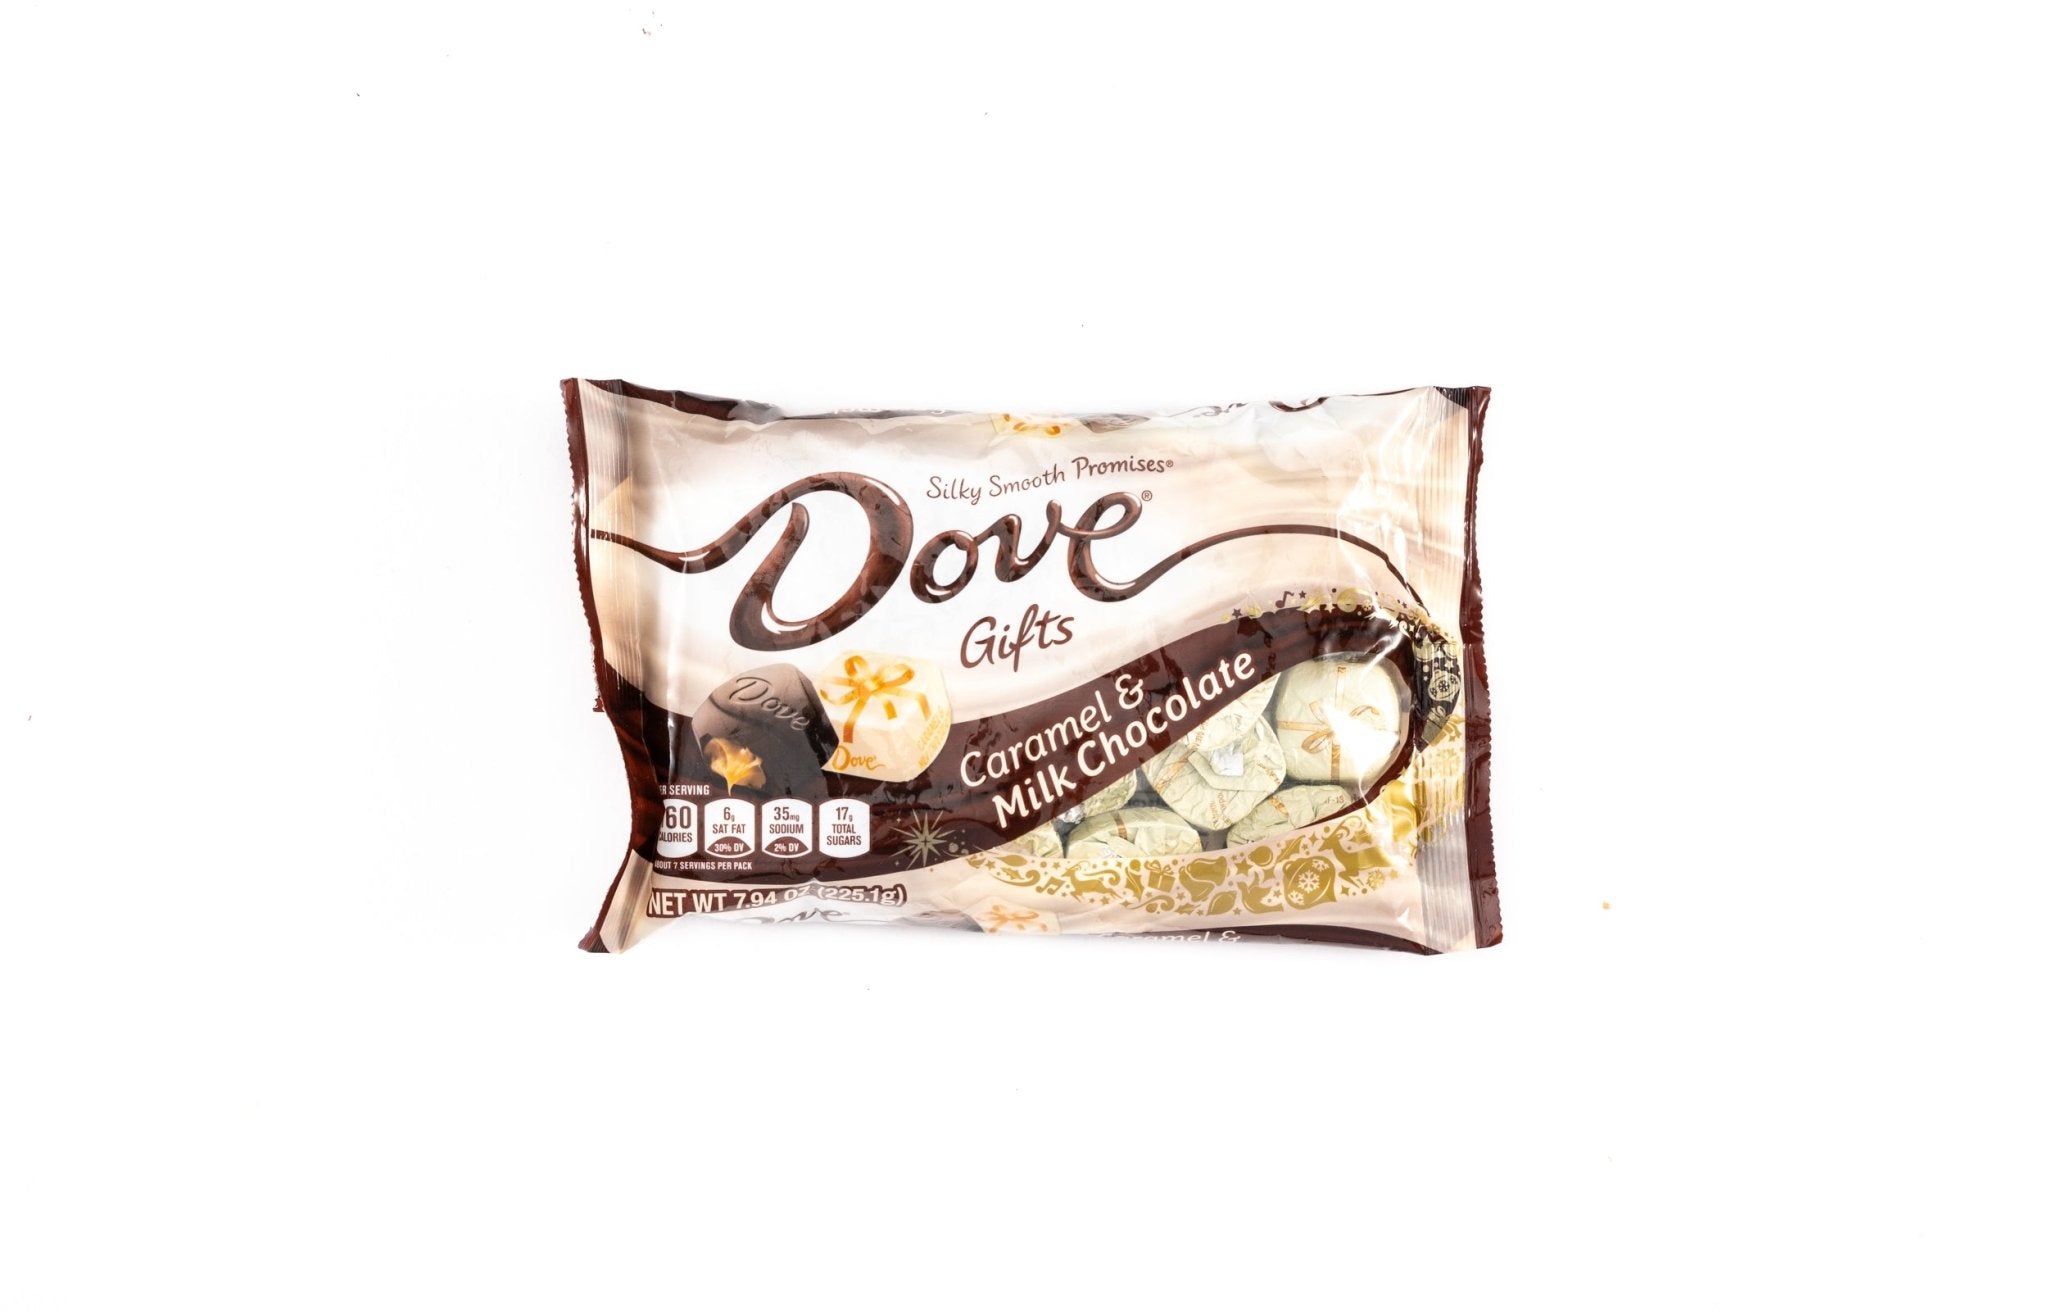 Dove Caramel & Milk Chocolate Gifts .266 oz - Vintage Candy Co.